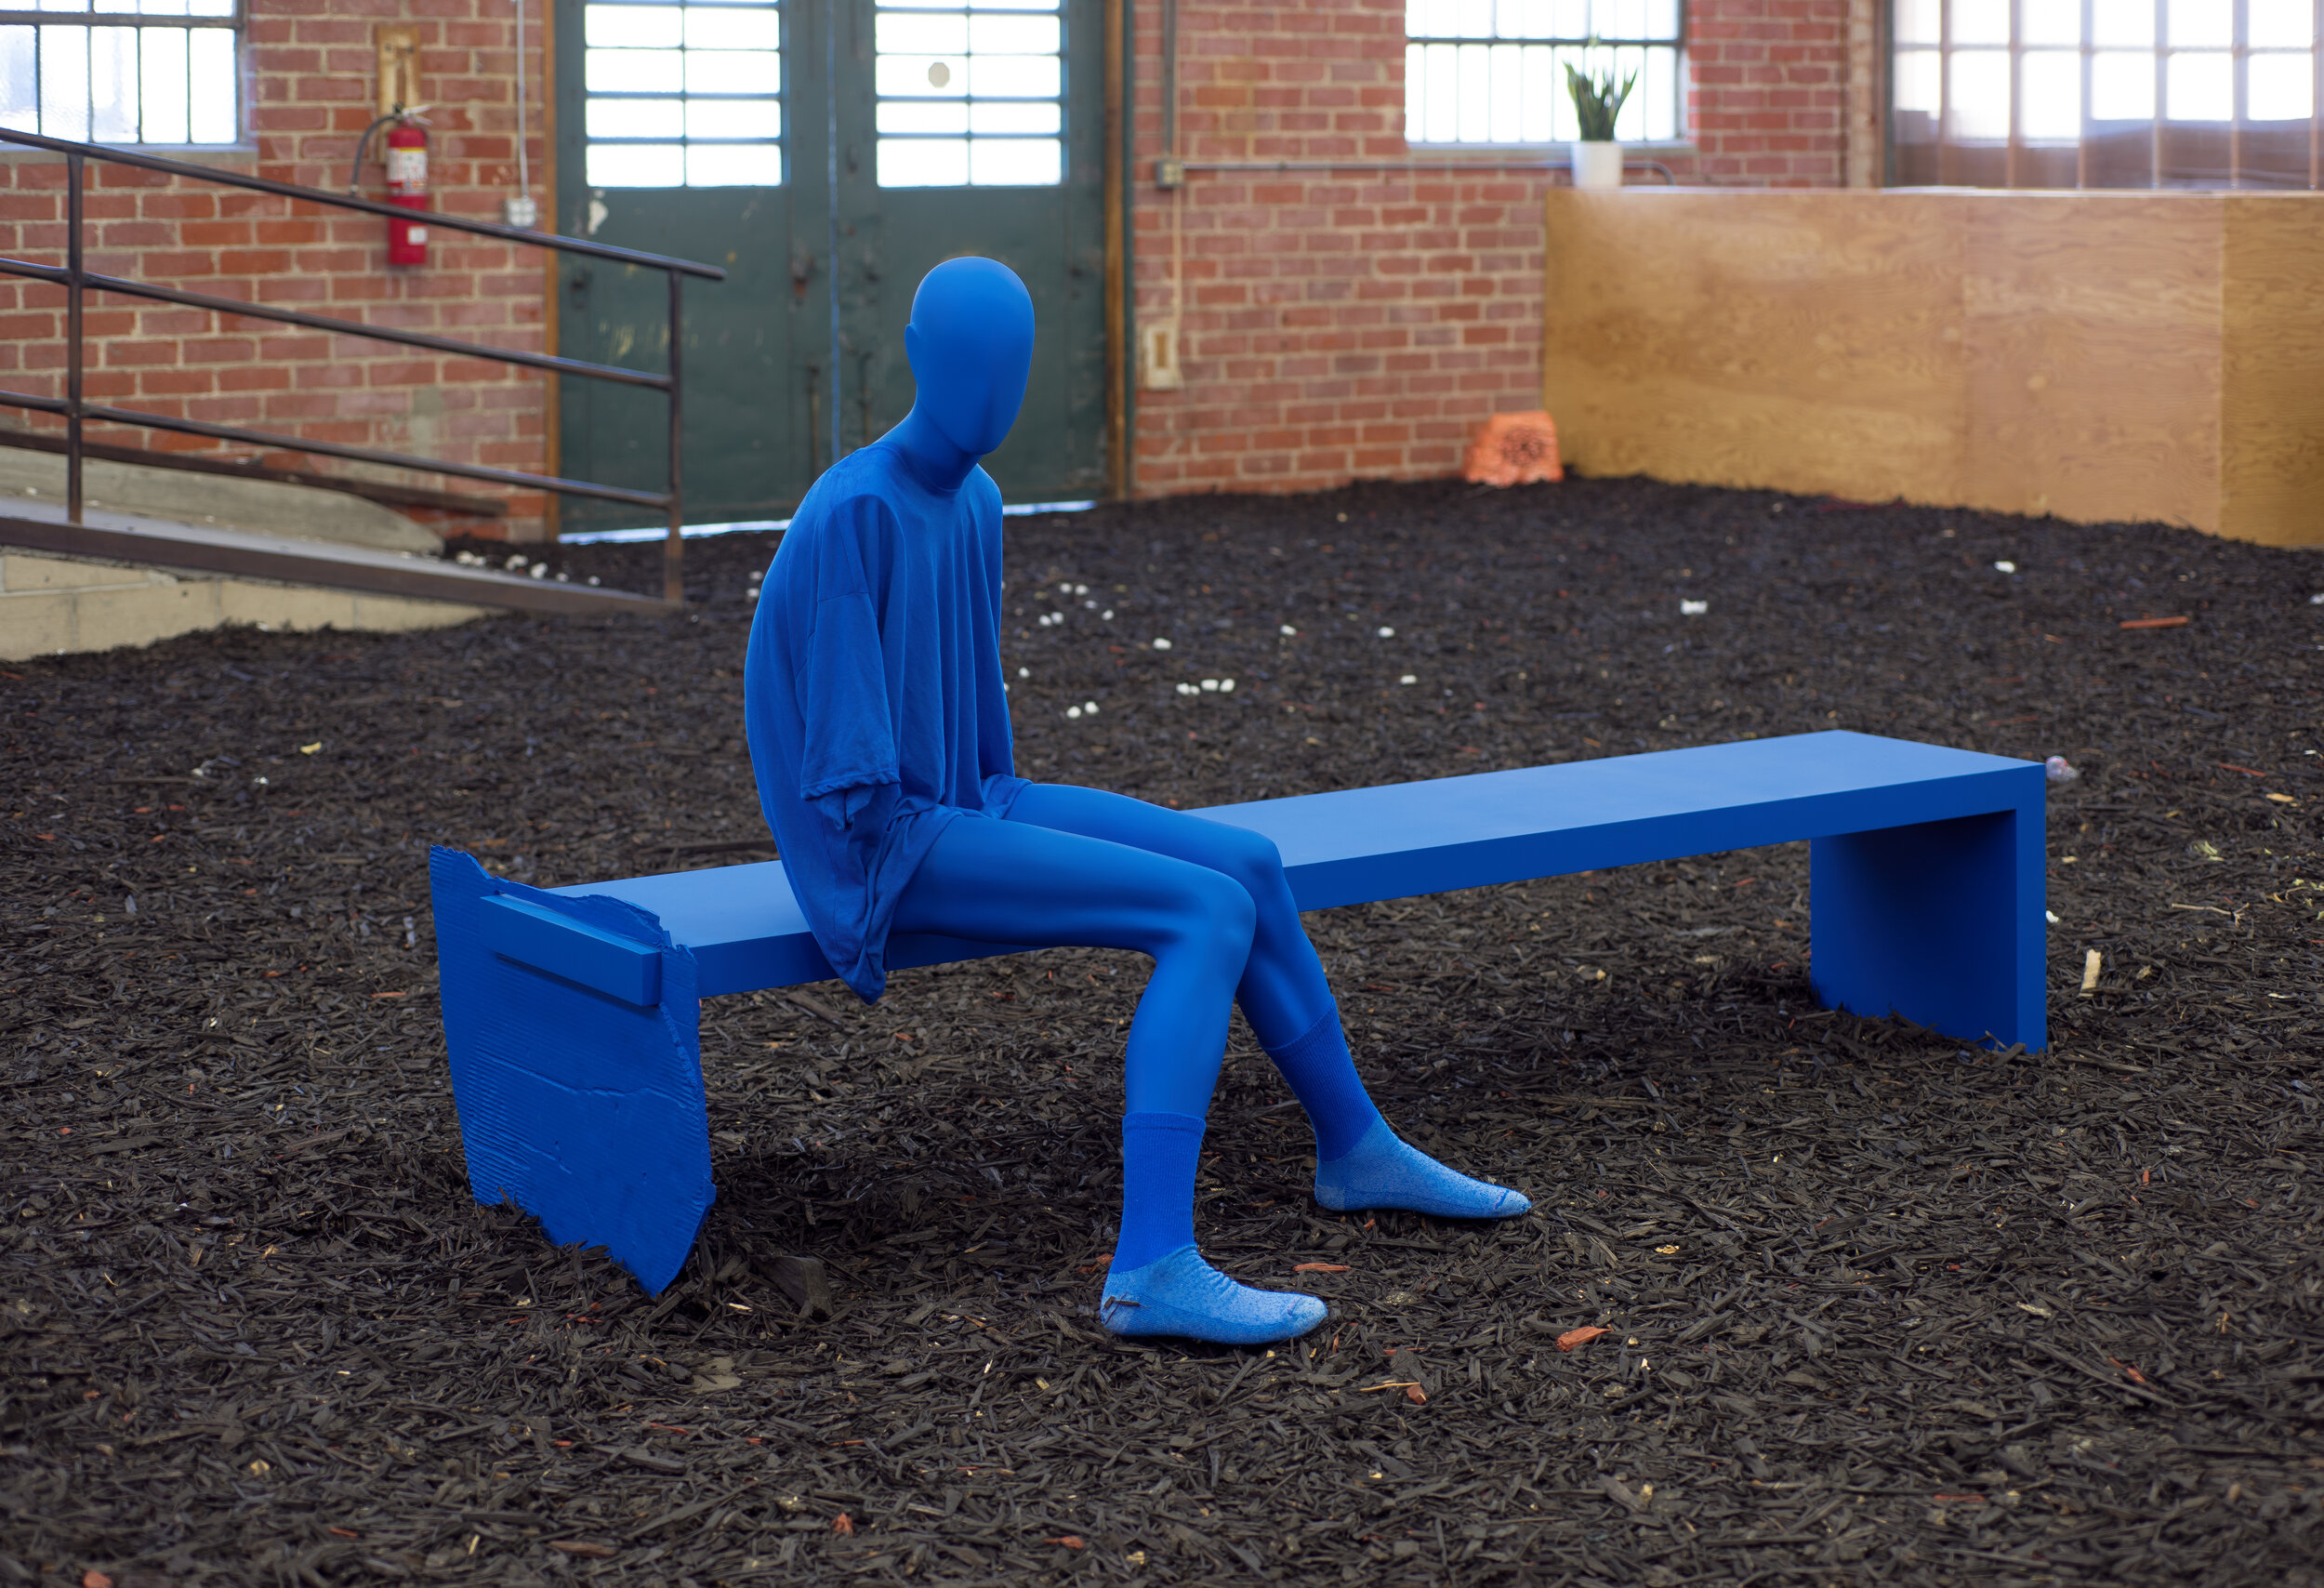   Bench Figure Angst Model in Cerulean,  2014. Mixed media. 96 x 18 x 52 inches 